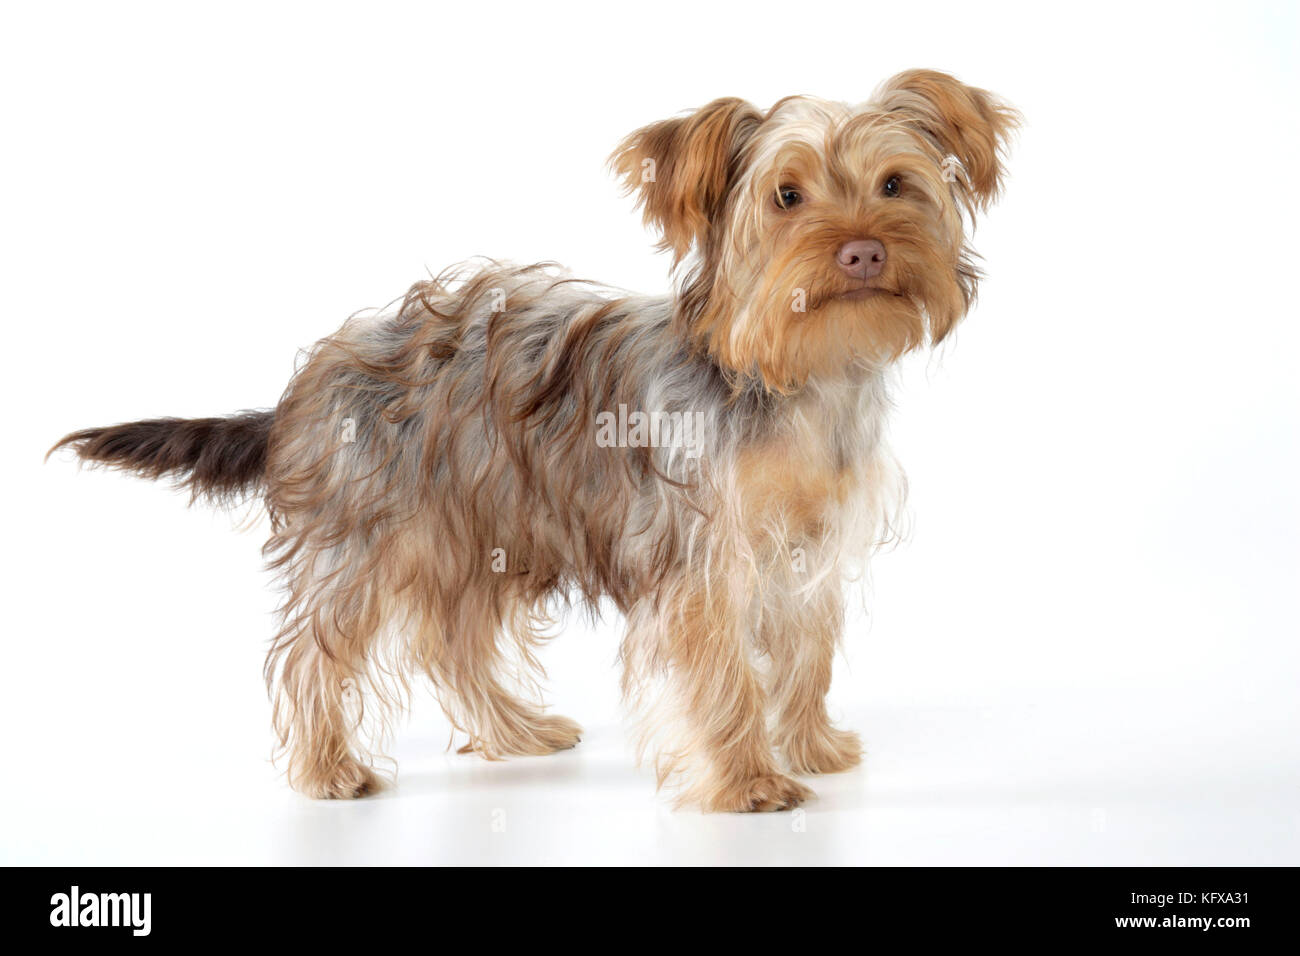 Dog - Poodle X Yorkie ( Yoodle or Yorkie Poo ). Cross breed of Poodle and Yorkshire Terrier. Stock Photo